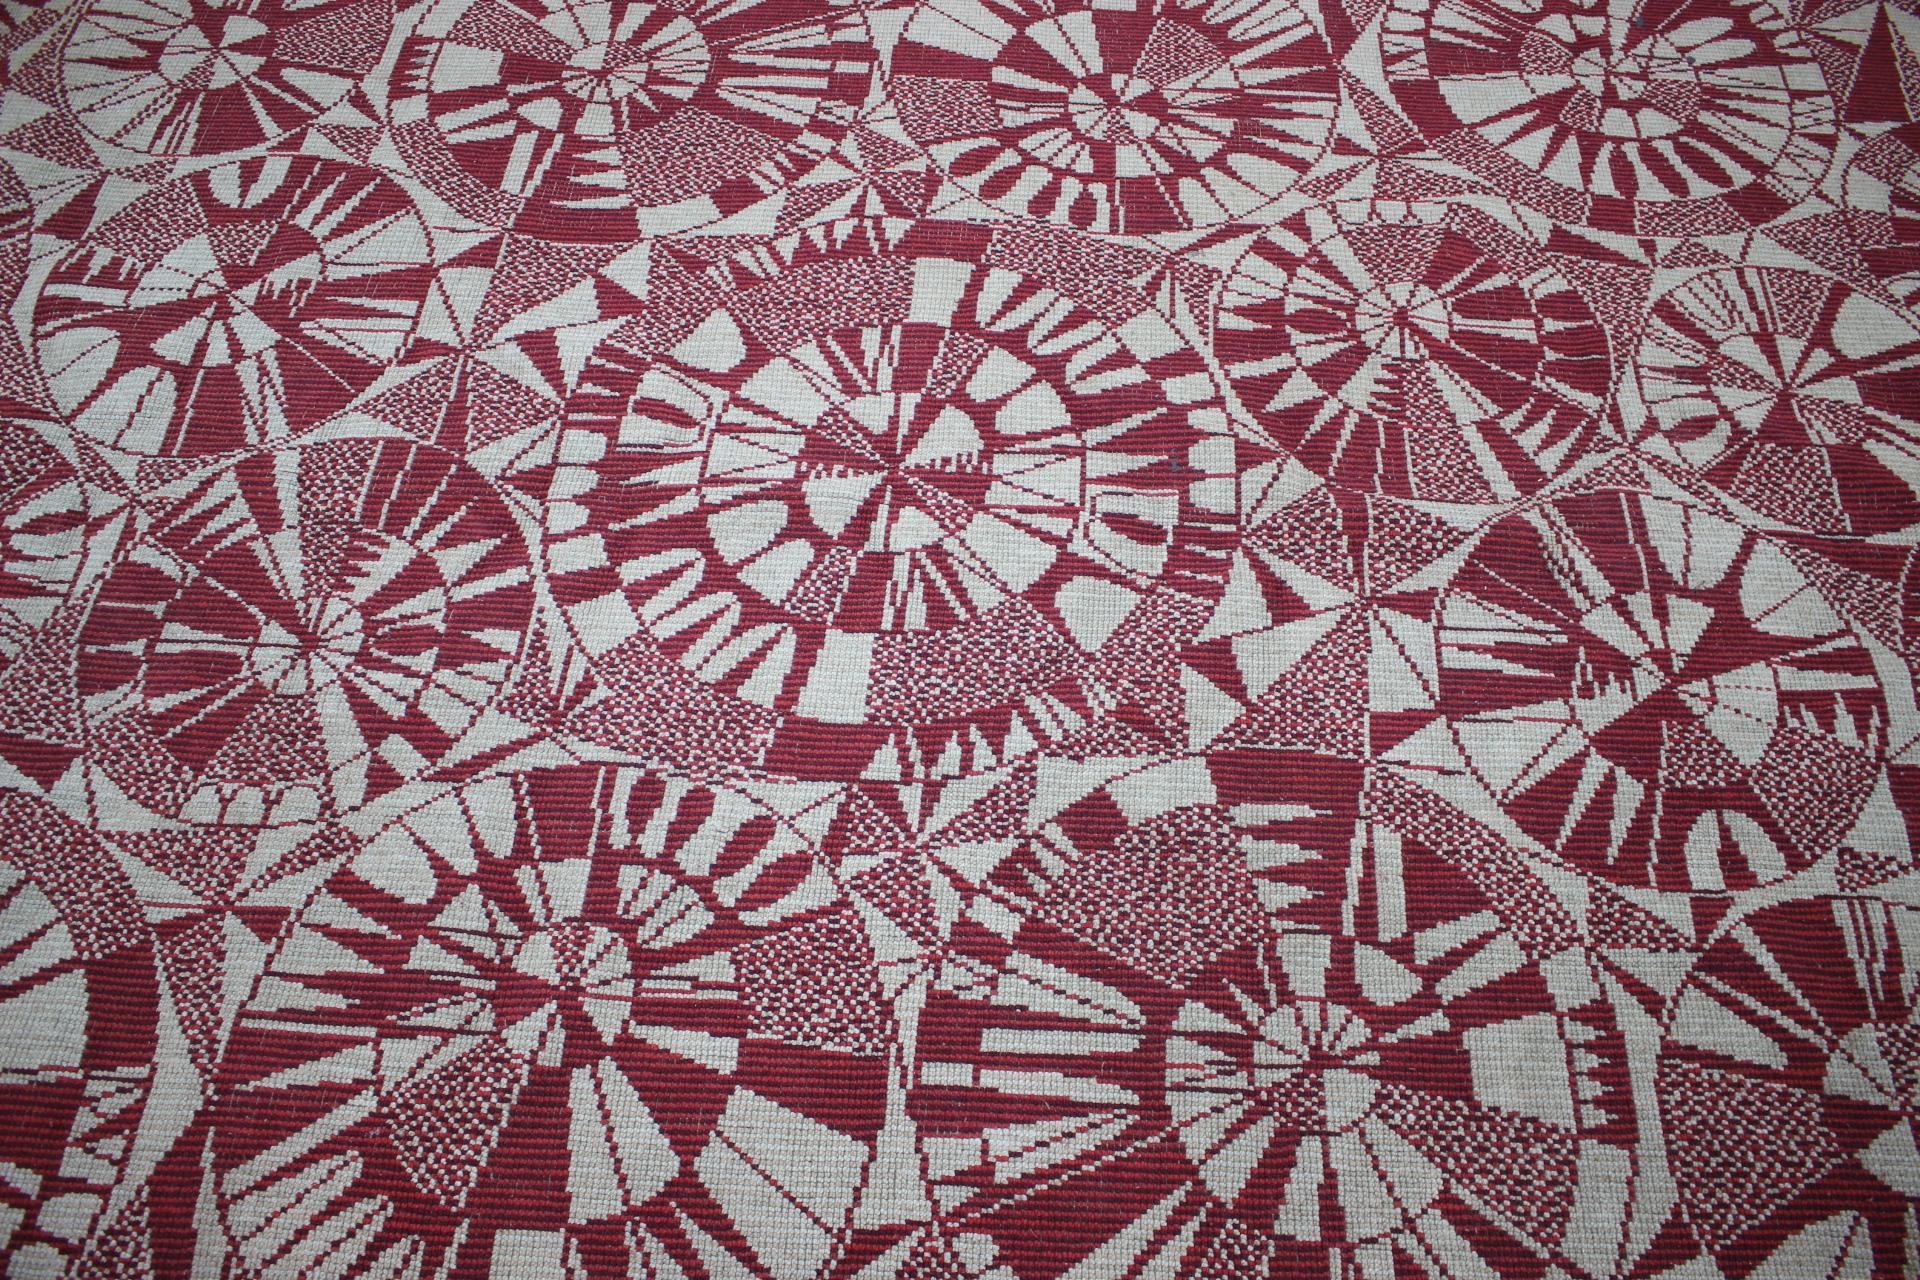 Czech Rare Design Organic Abstract Geometric Carpet/Rug in, 1960s For Sale